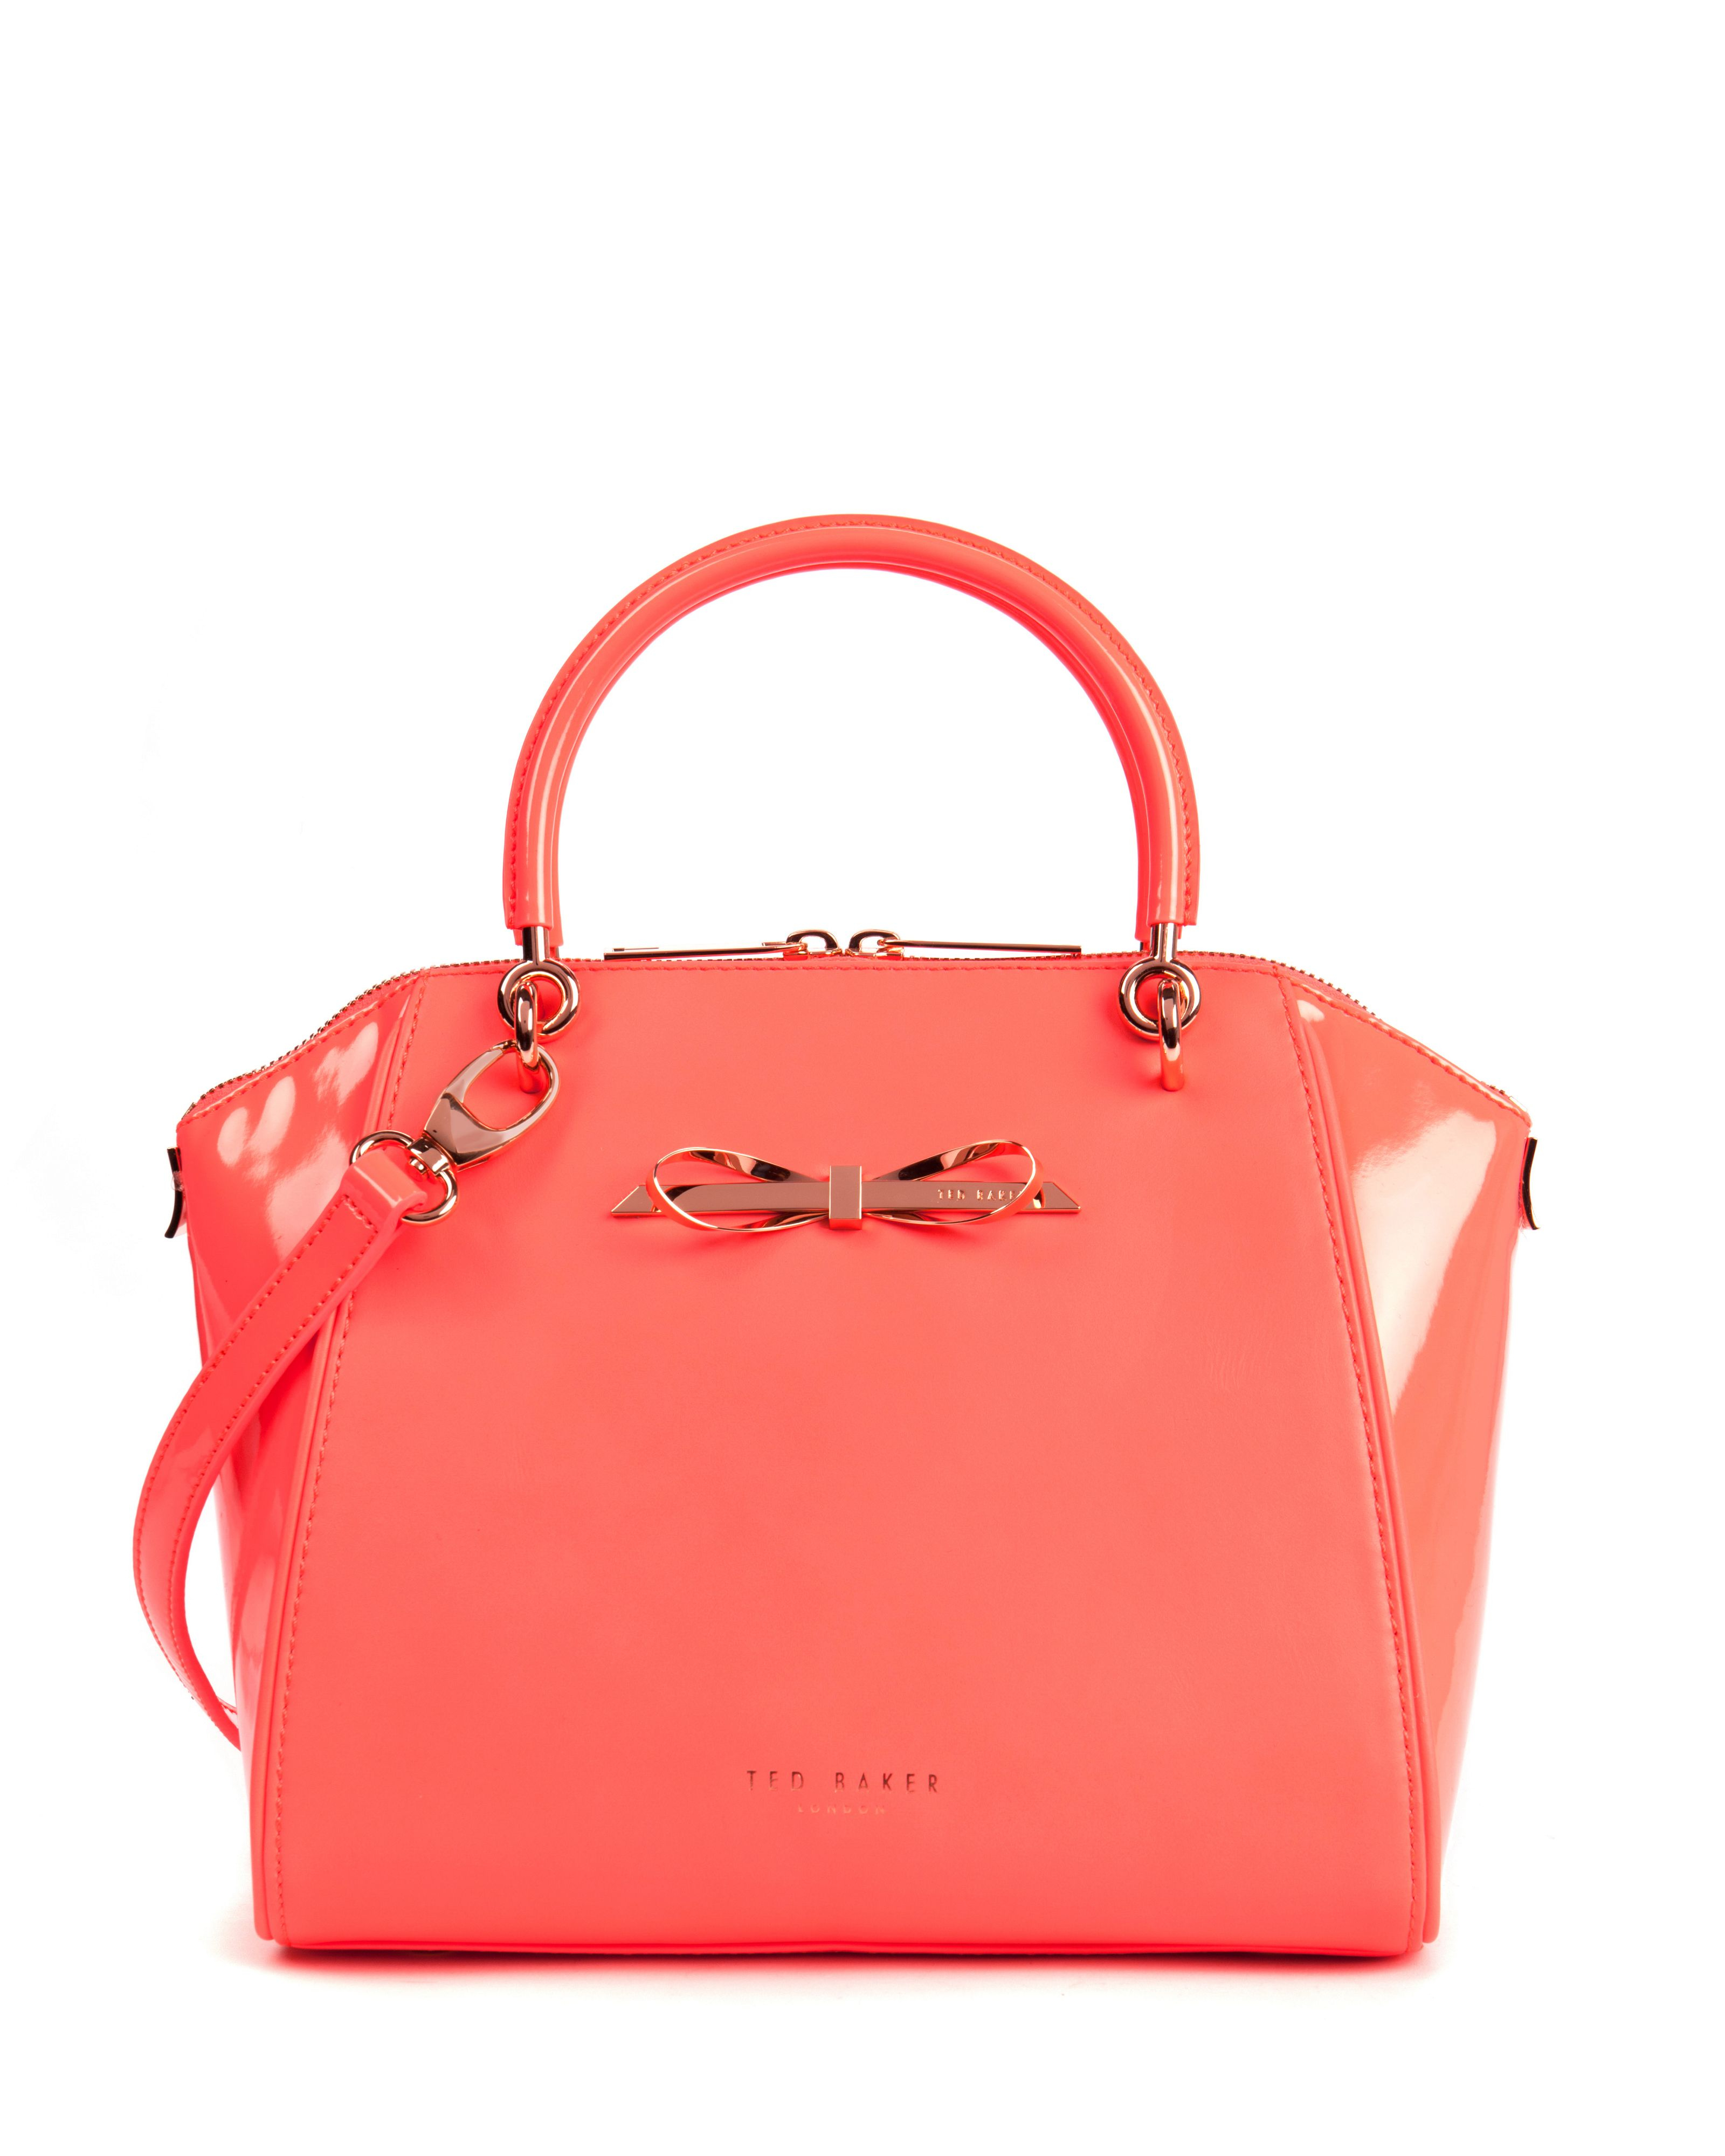 Ted baker Pailey Small Slim Bow Tote Bag in Orange | Lyst